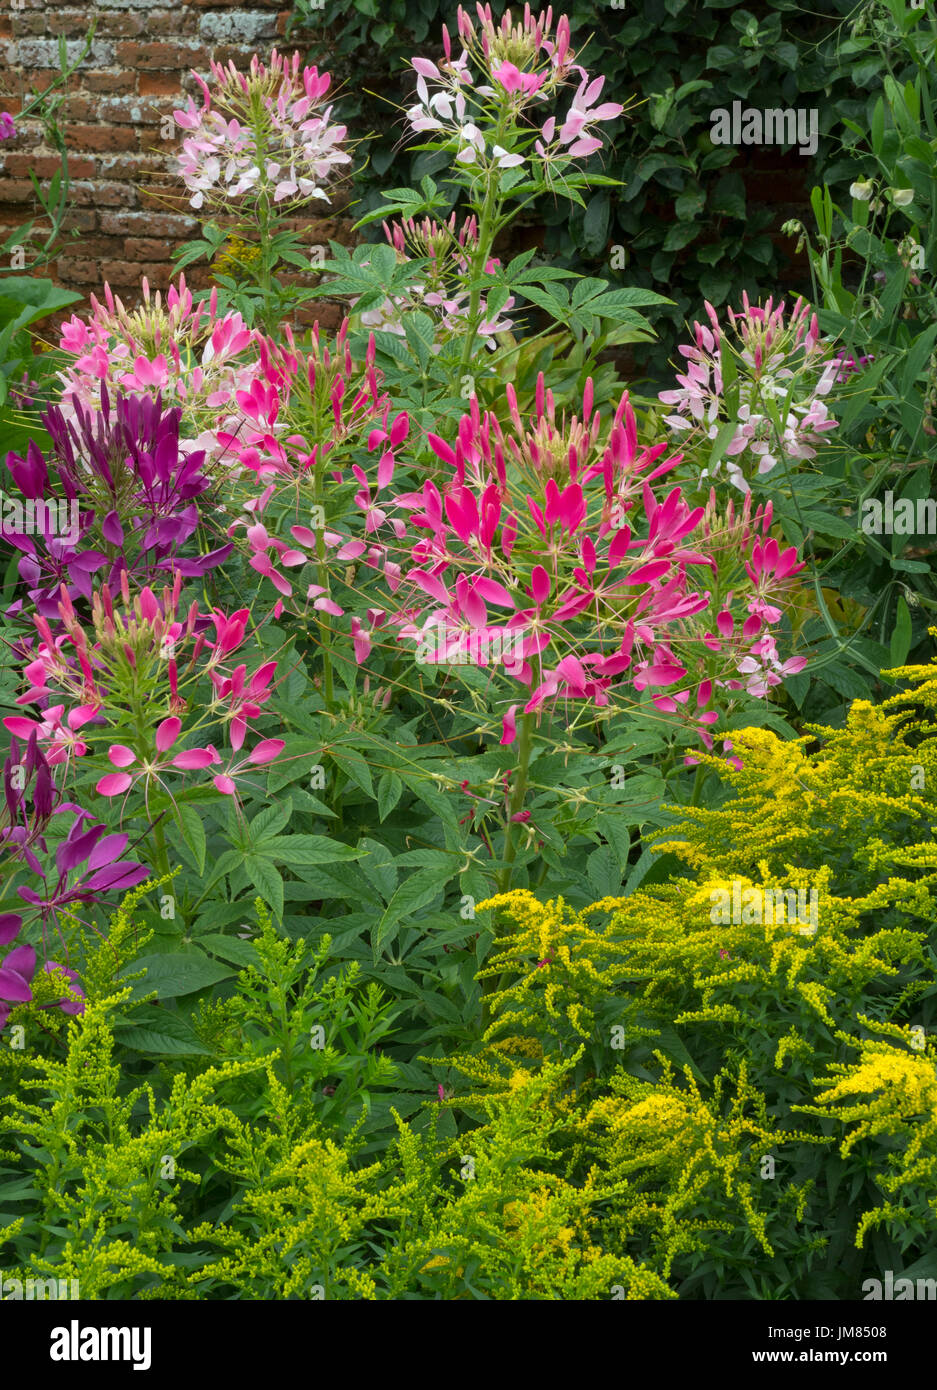 Cleome hassleriana or Spider plant in border with Golden Rod Stock Photo